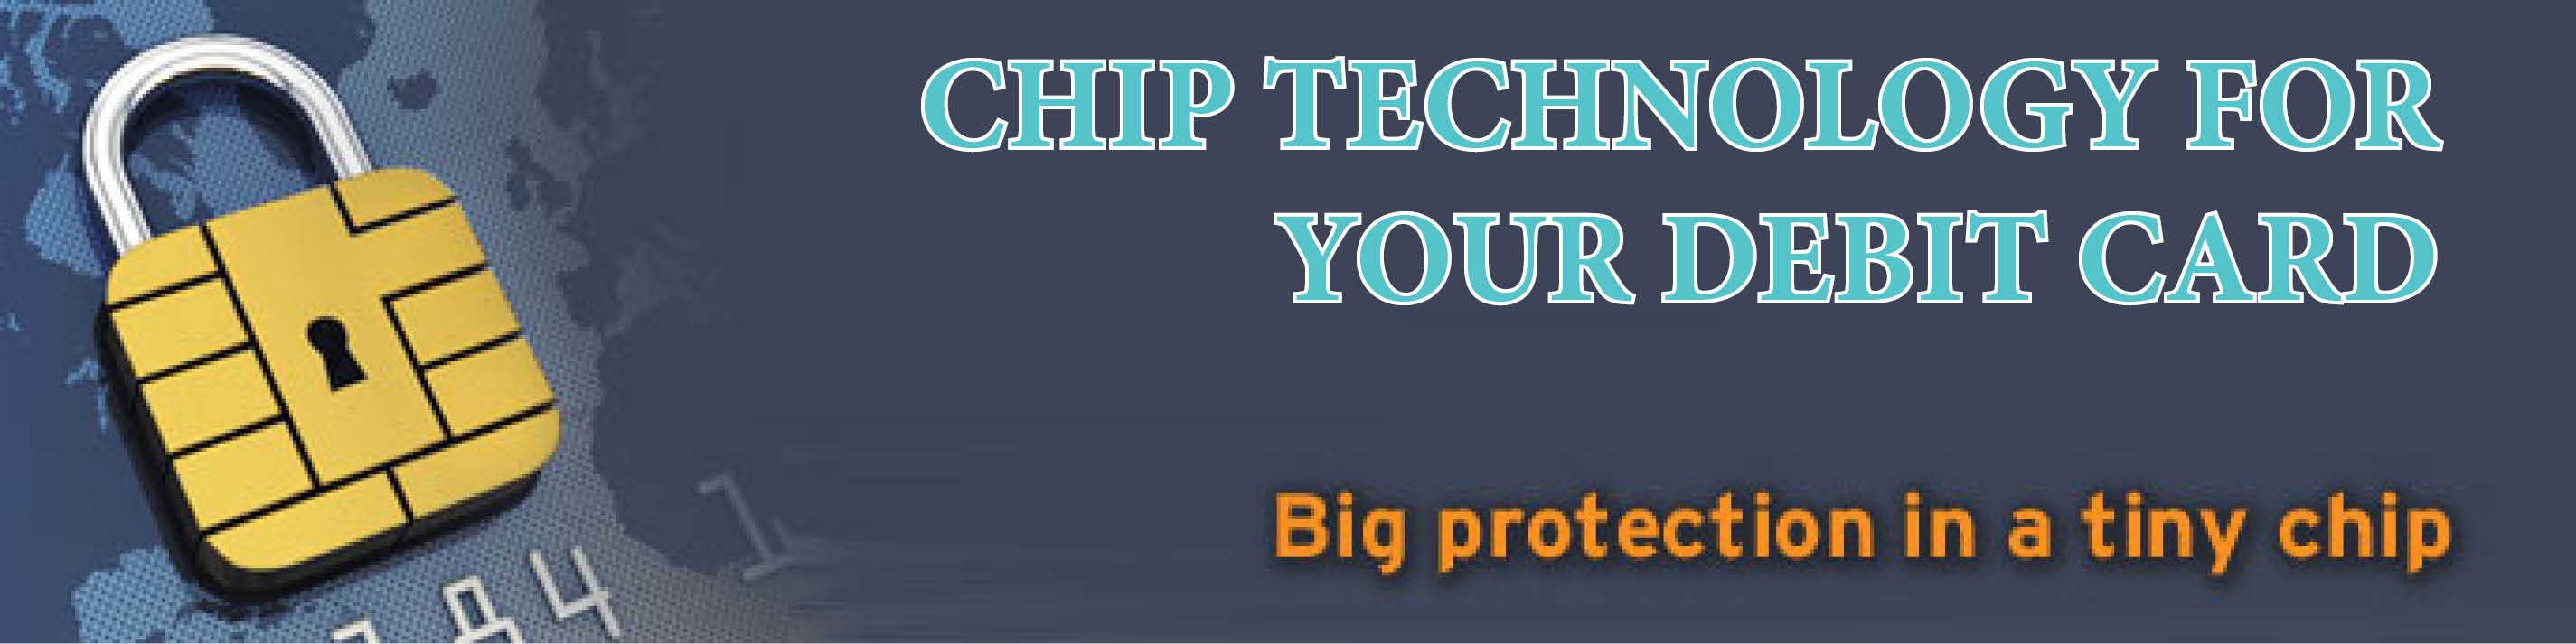 Chip Technnology for your Debit Card Big Protection in a Tiny Chip 